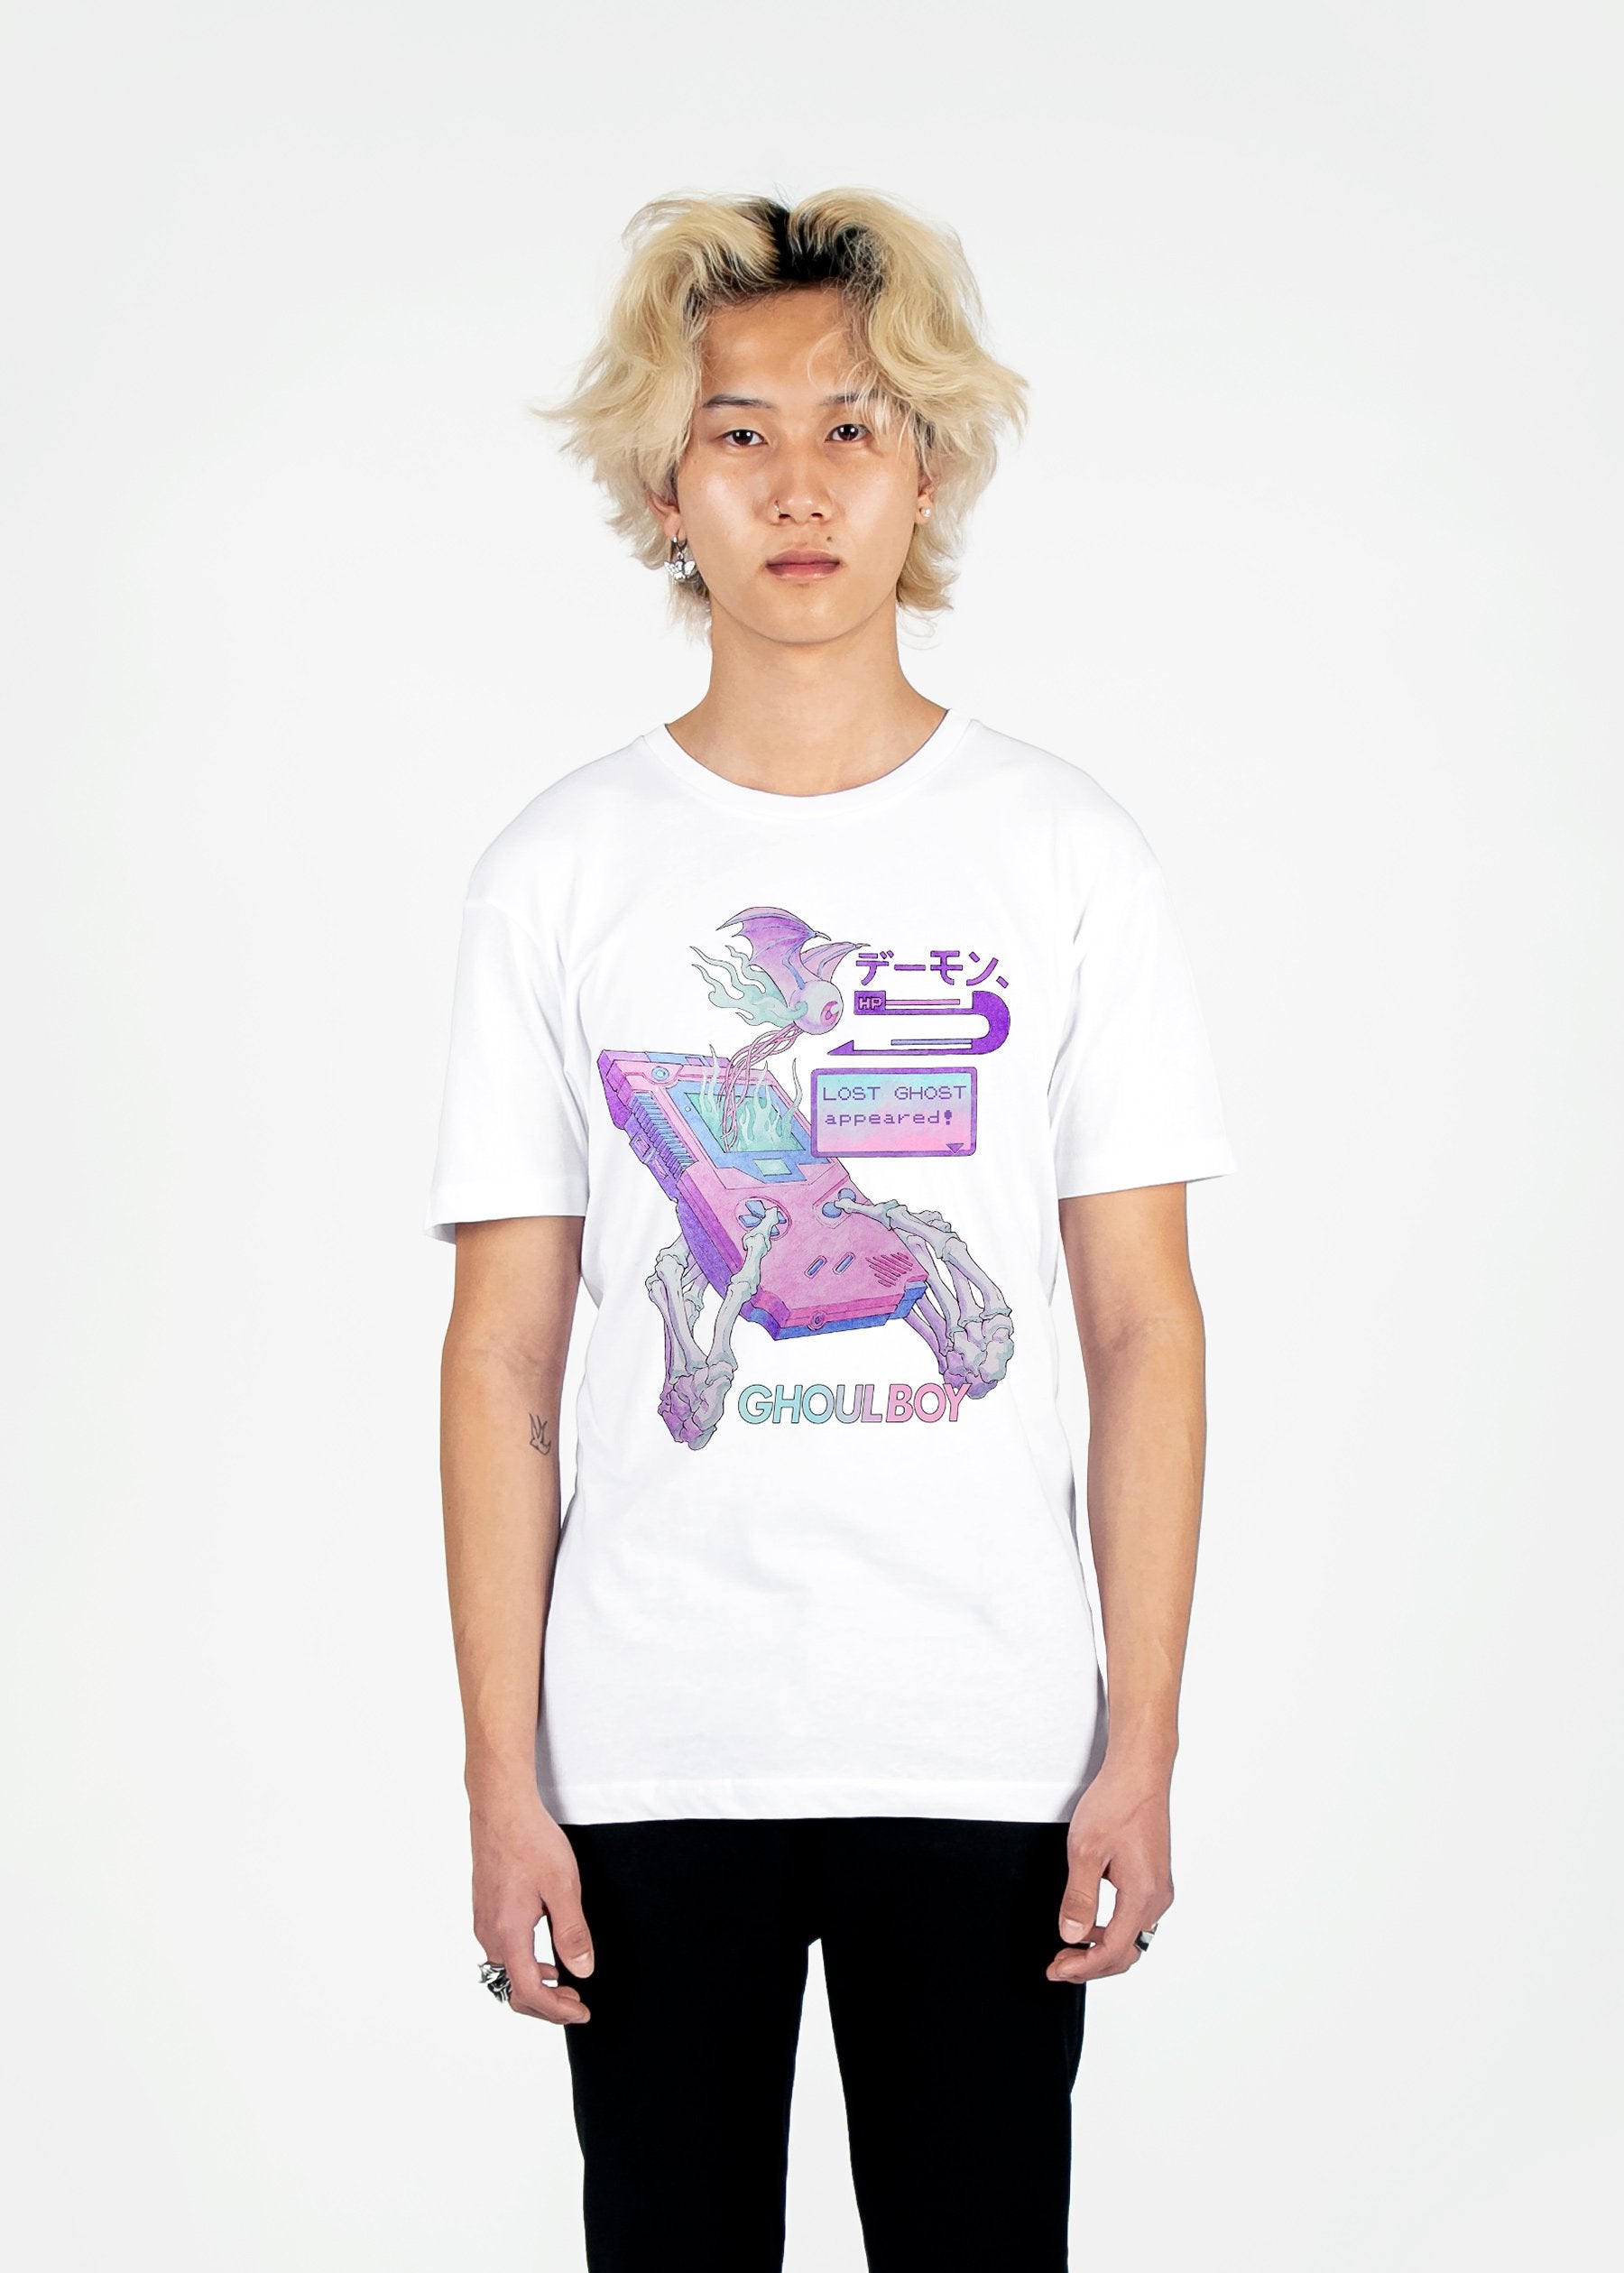 Ghoulboy Tee Graphic Tee Vapor95 White S